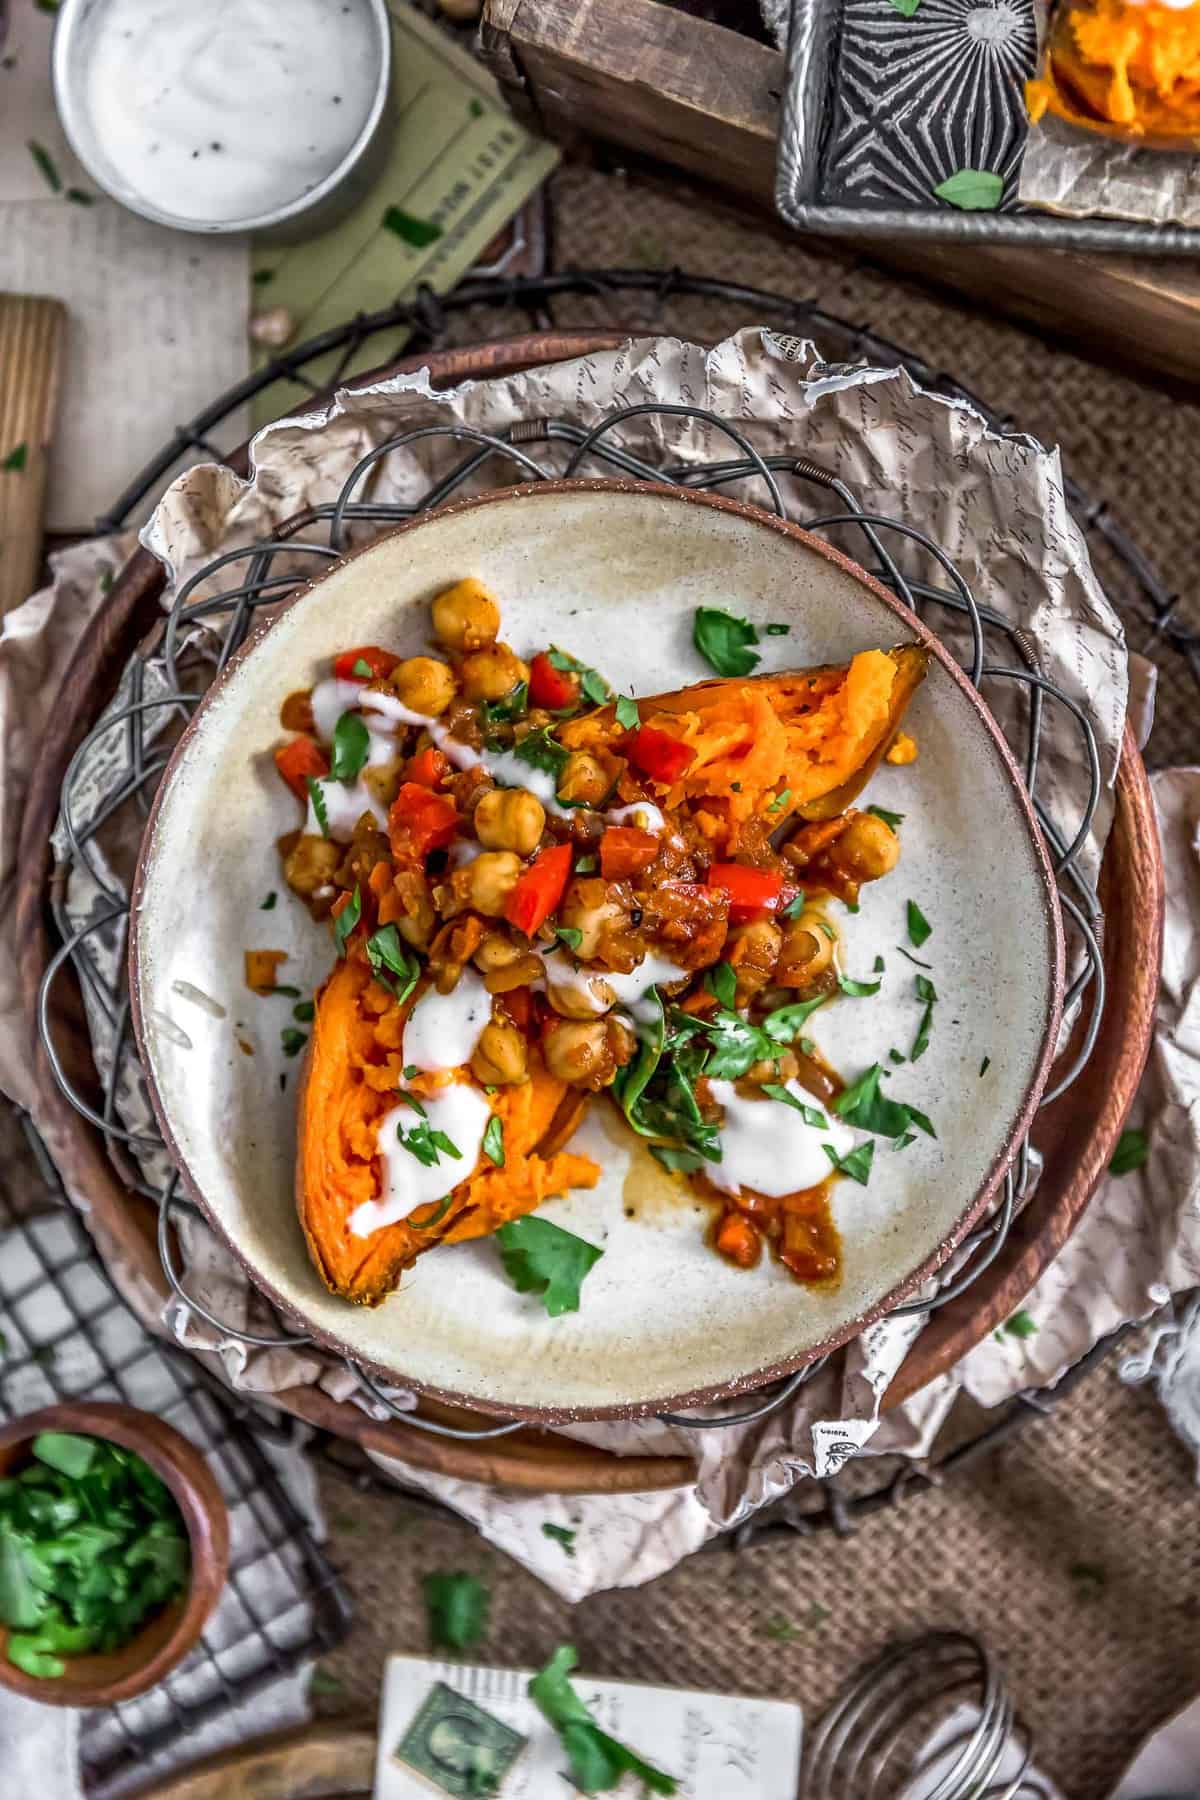 Plated Moroccan Spiced Chickpeas and Garlic Sauce over a sweet potato